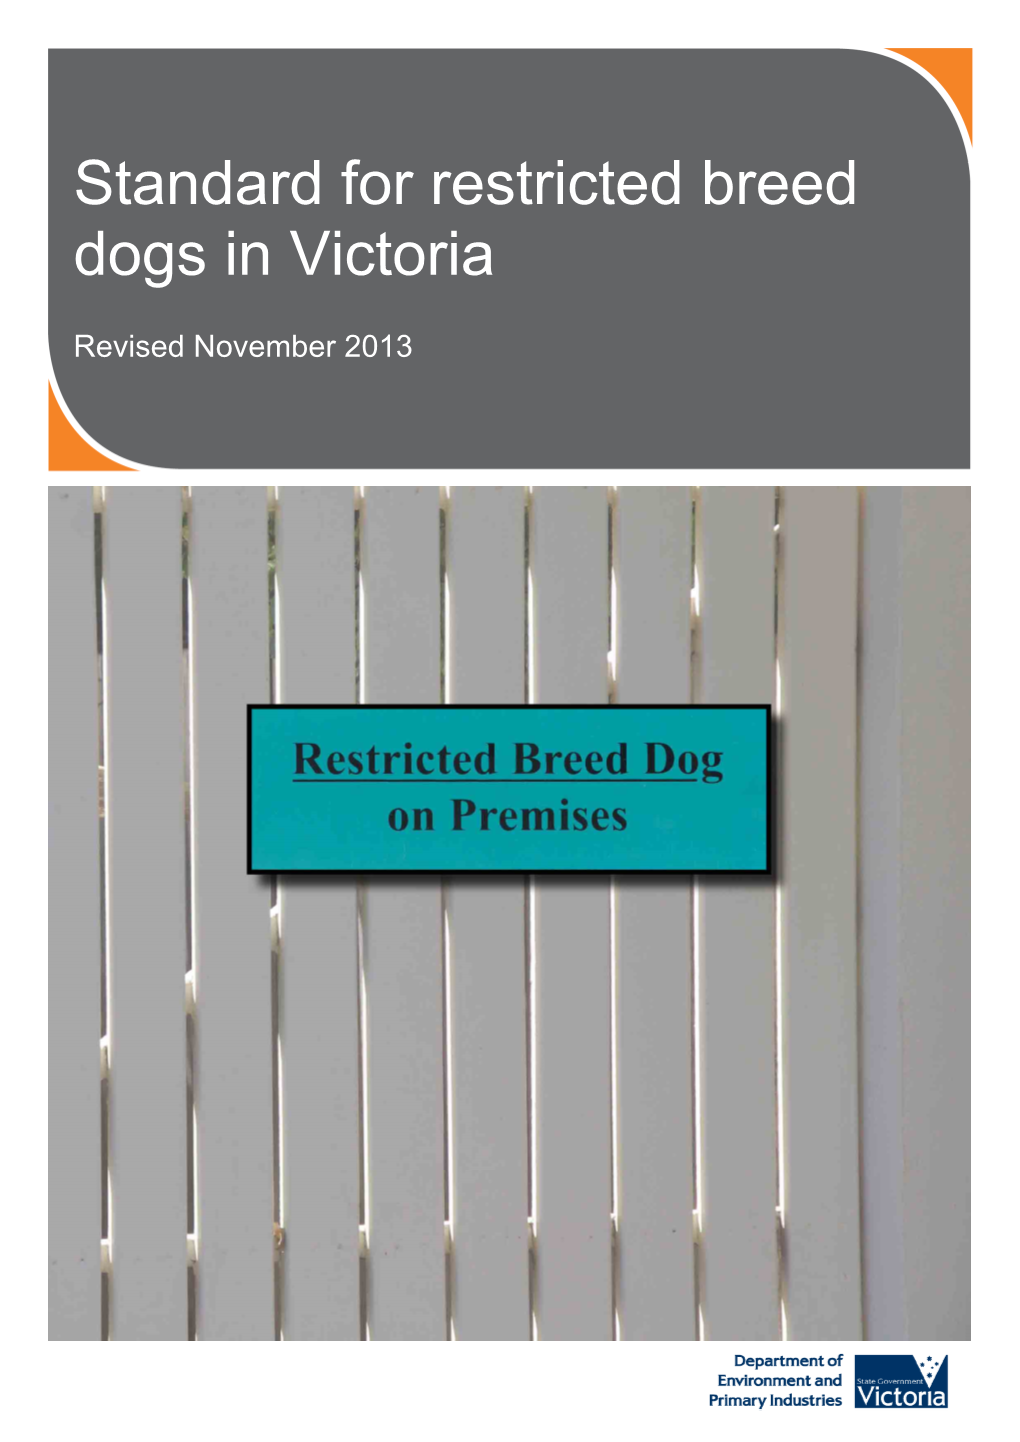 Standard for Restricted Breed Dogs in Victoria